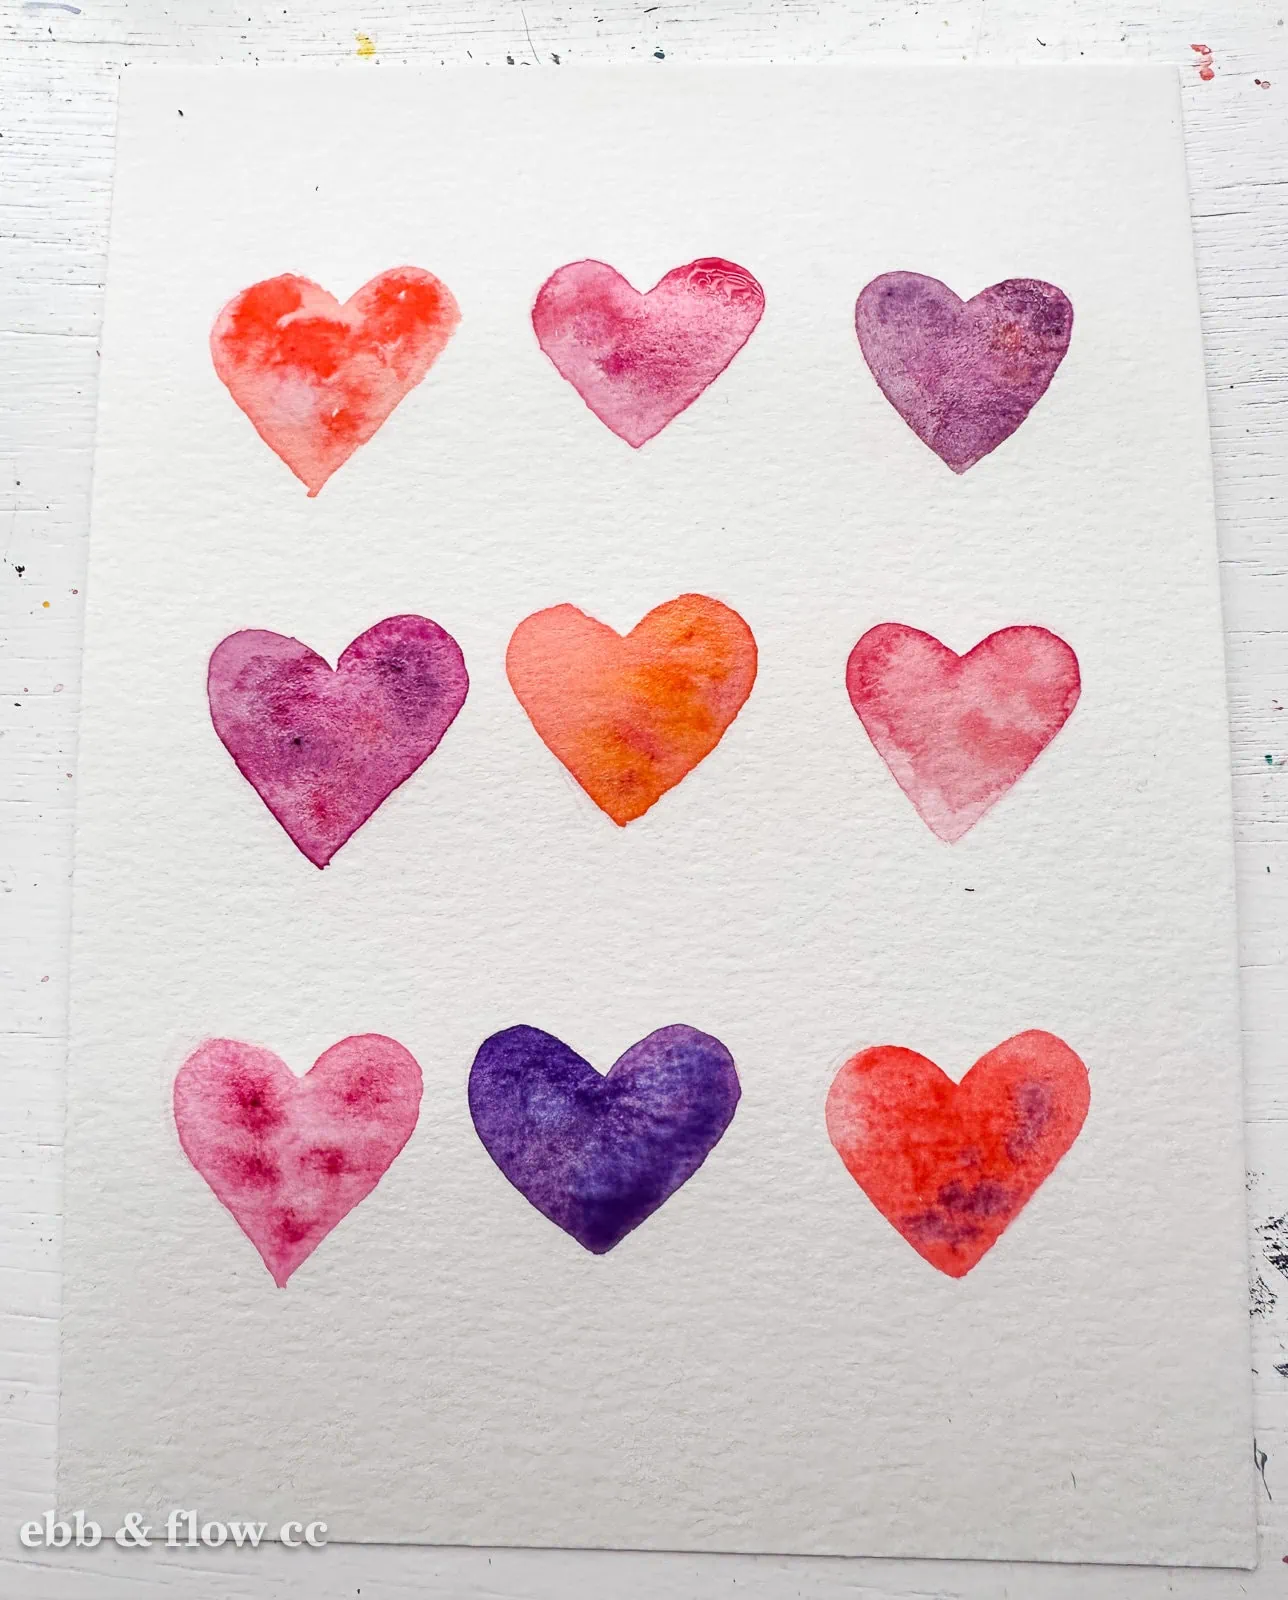 hearts painted in red, pink and purple